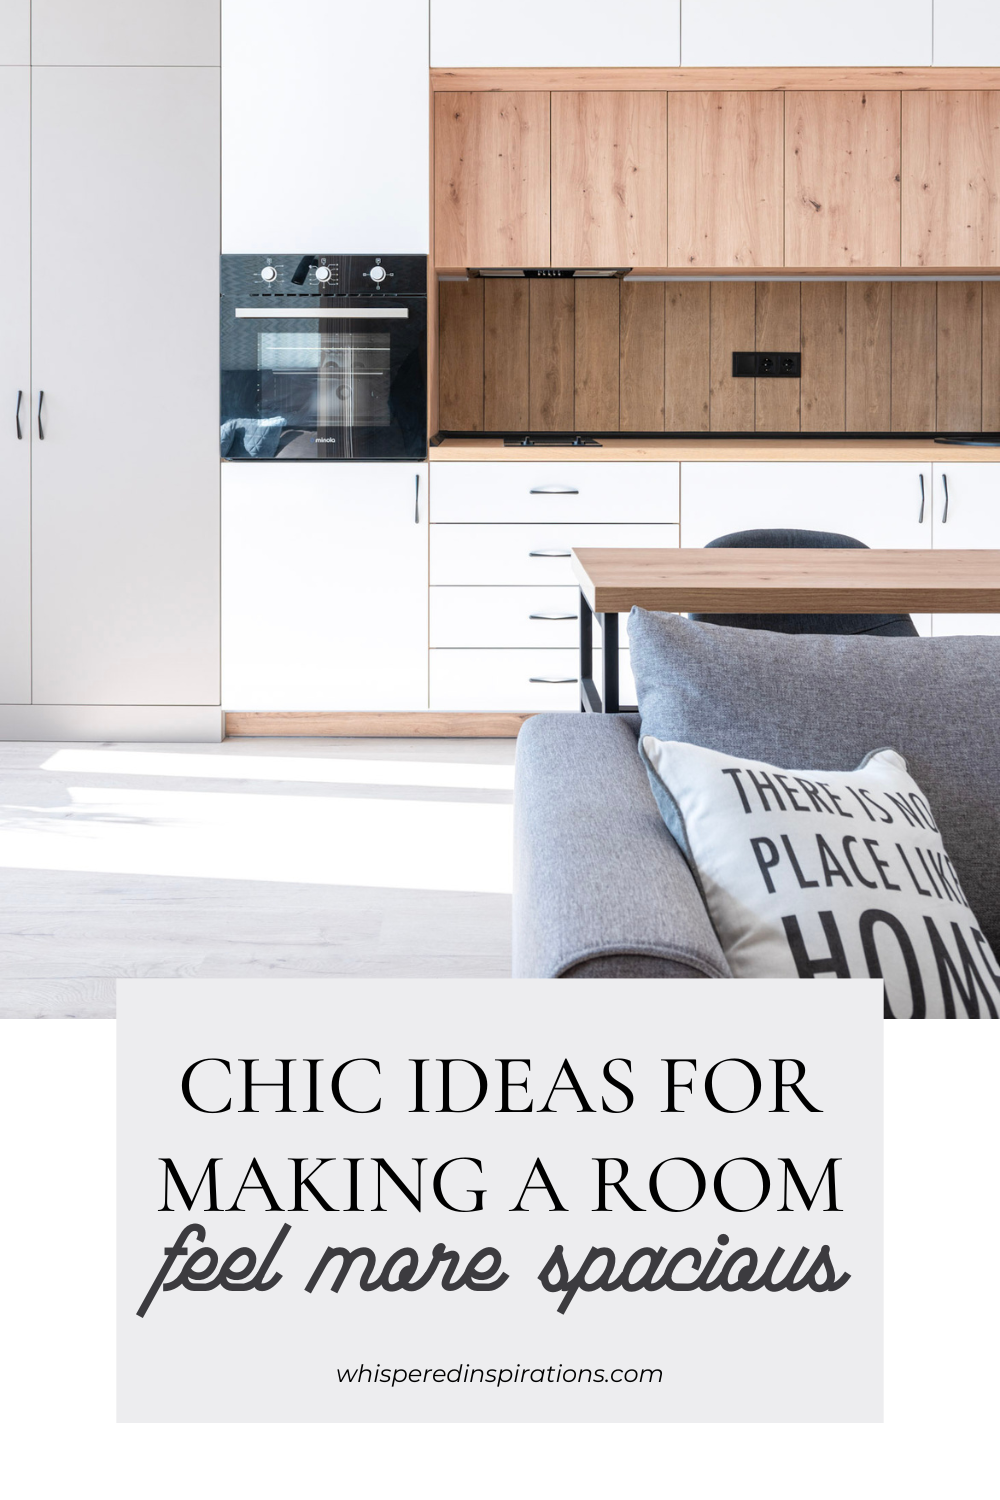 A glimpse of a living room is shown and a beautiful kitchen is shown in the background. This article covers chic ideas for making a room feel more spacious.